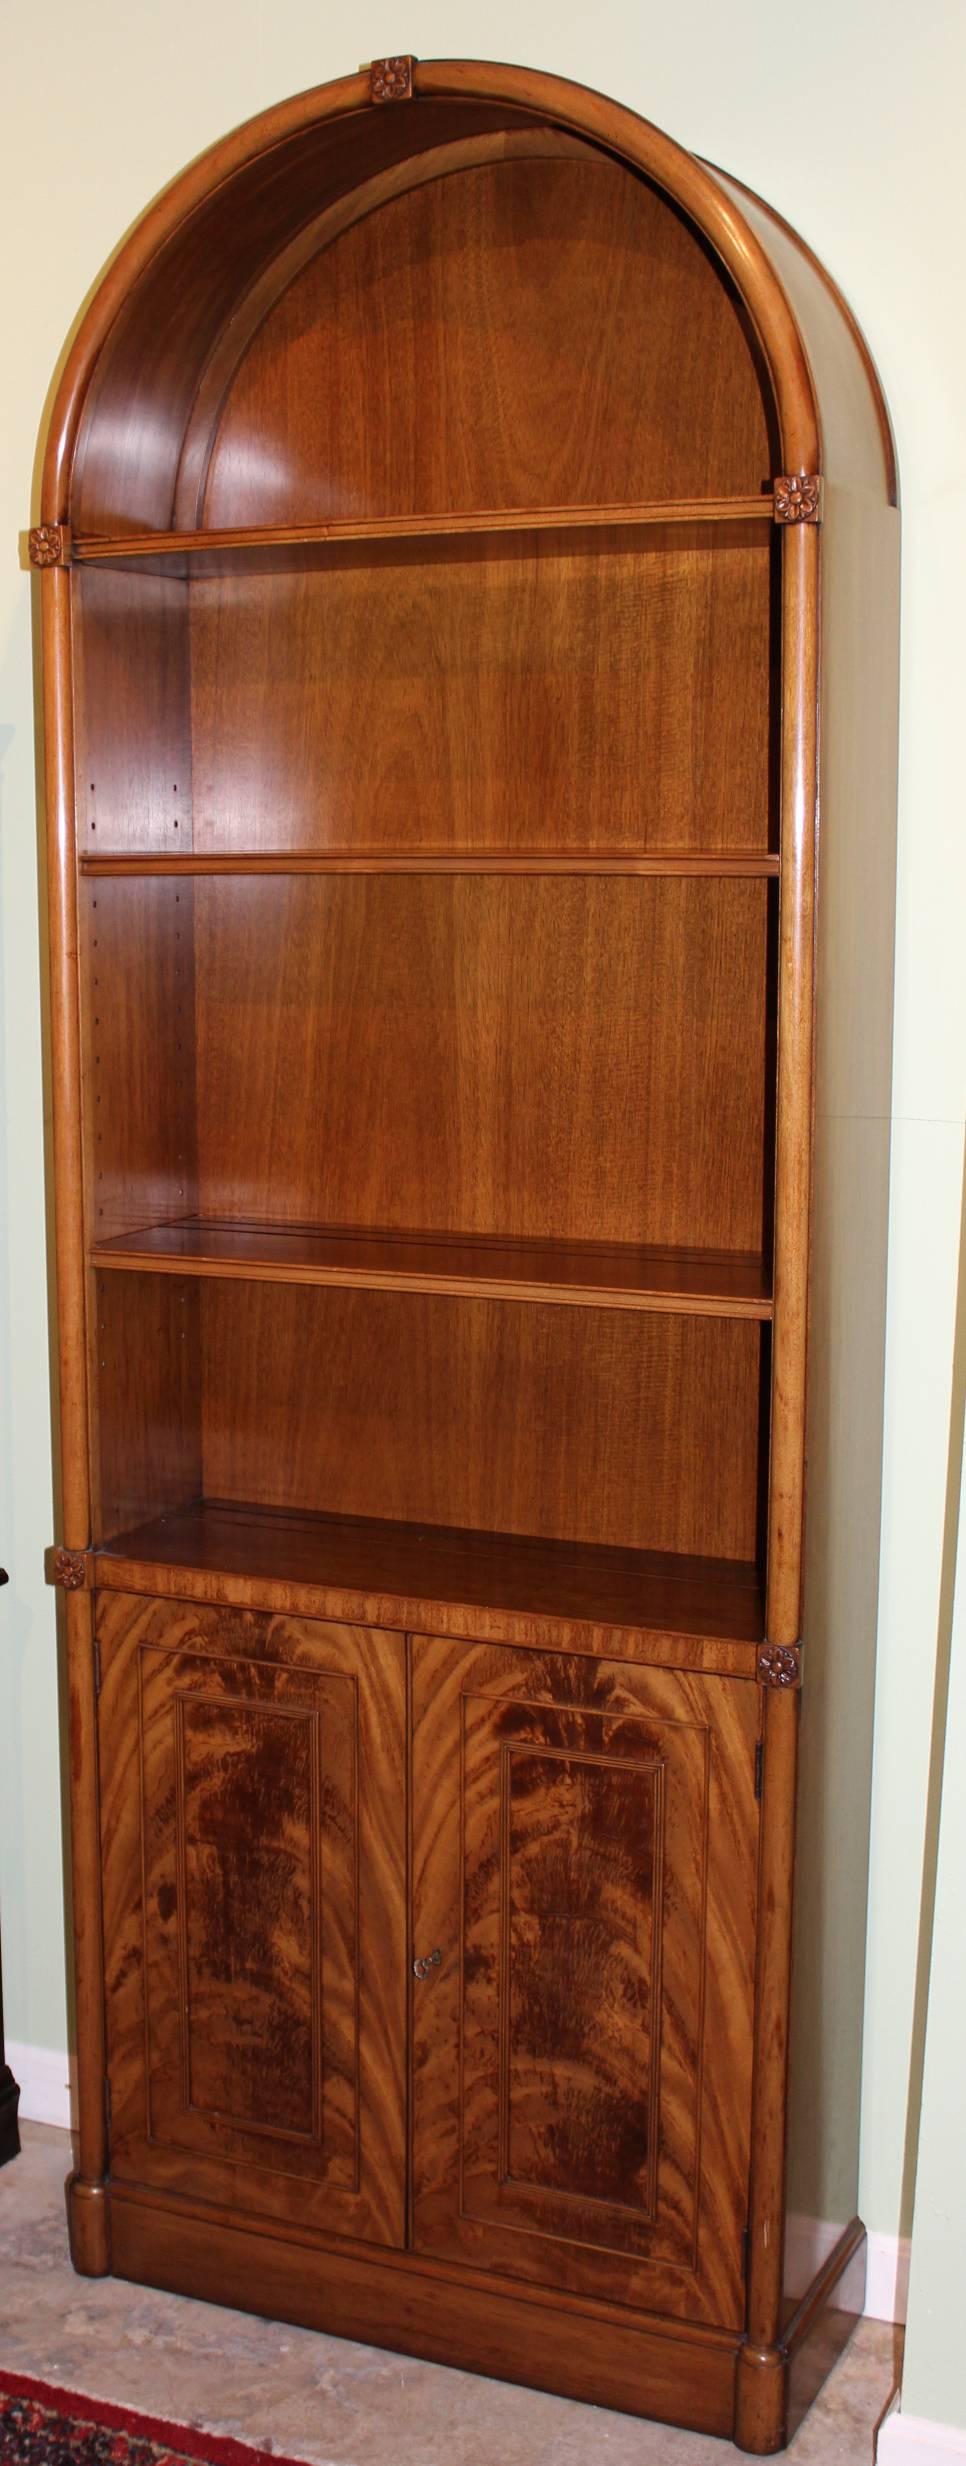 A fine example of an arched mahogany bookcase or china cabinet,  from the Kaplan Furniture Beacon Hill Collection, with one permanent and two adjustable shelves surmounting  two doors, which open to reveal one adjustable interior shelf. The shelves